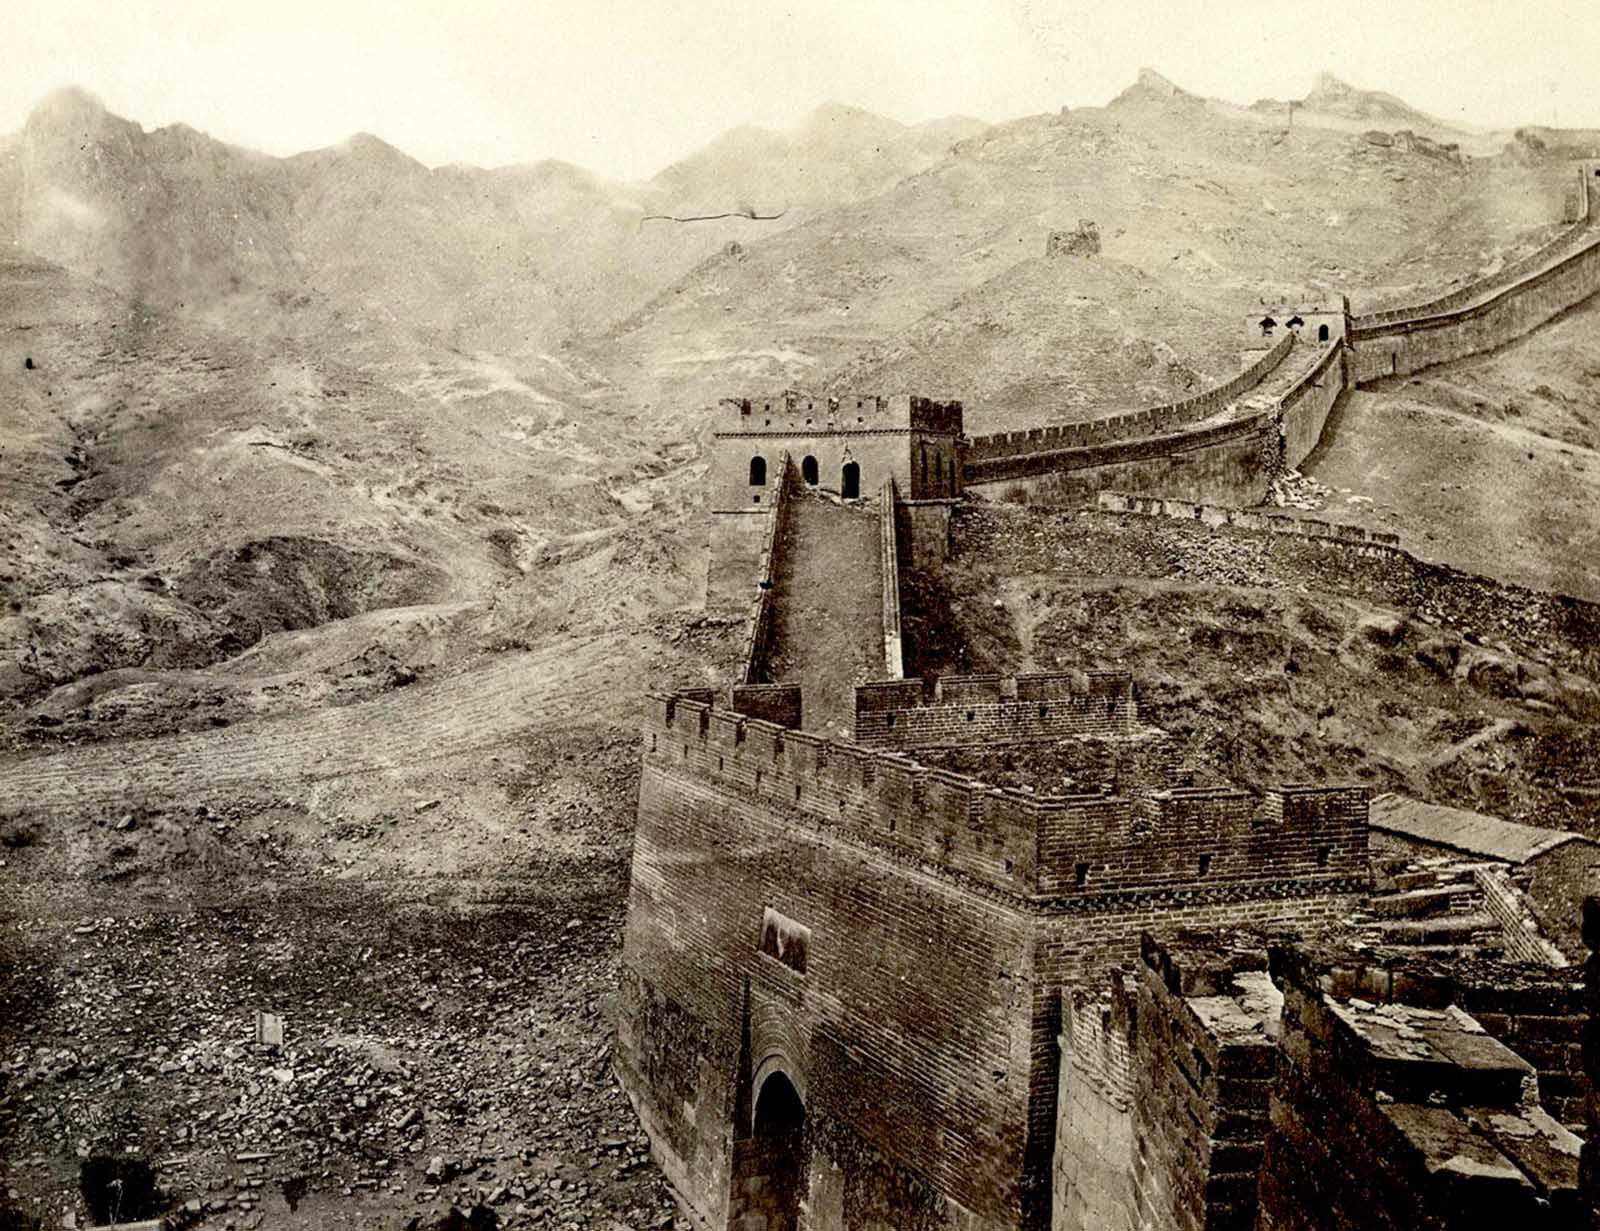 A photograph showing the section of the Great Wall that includes the Nankou pass leading to Mongolia.